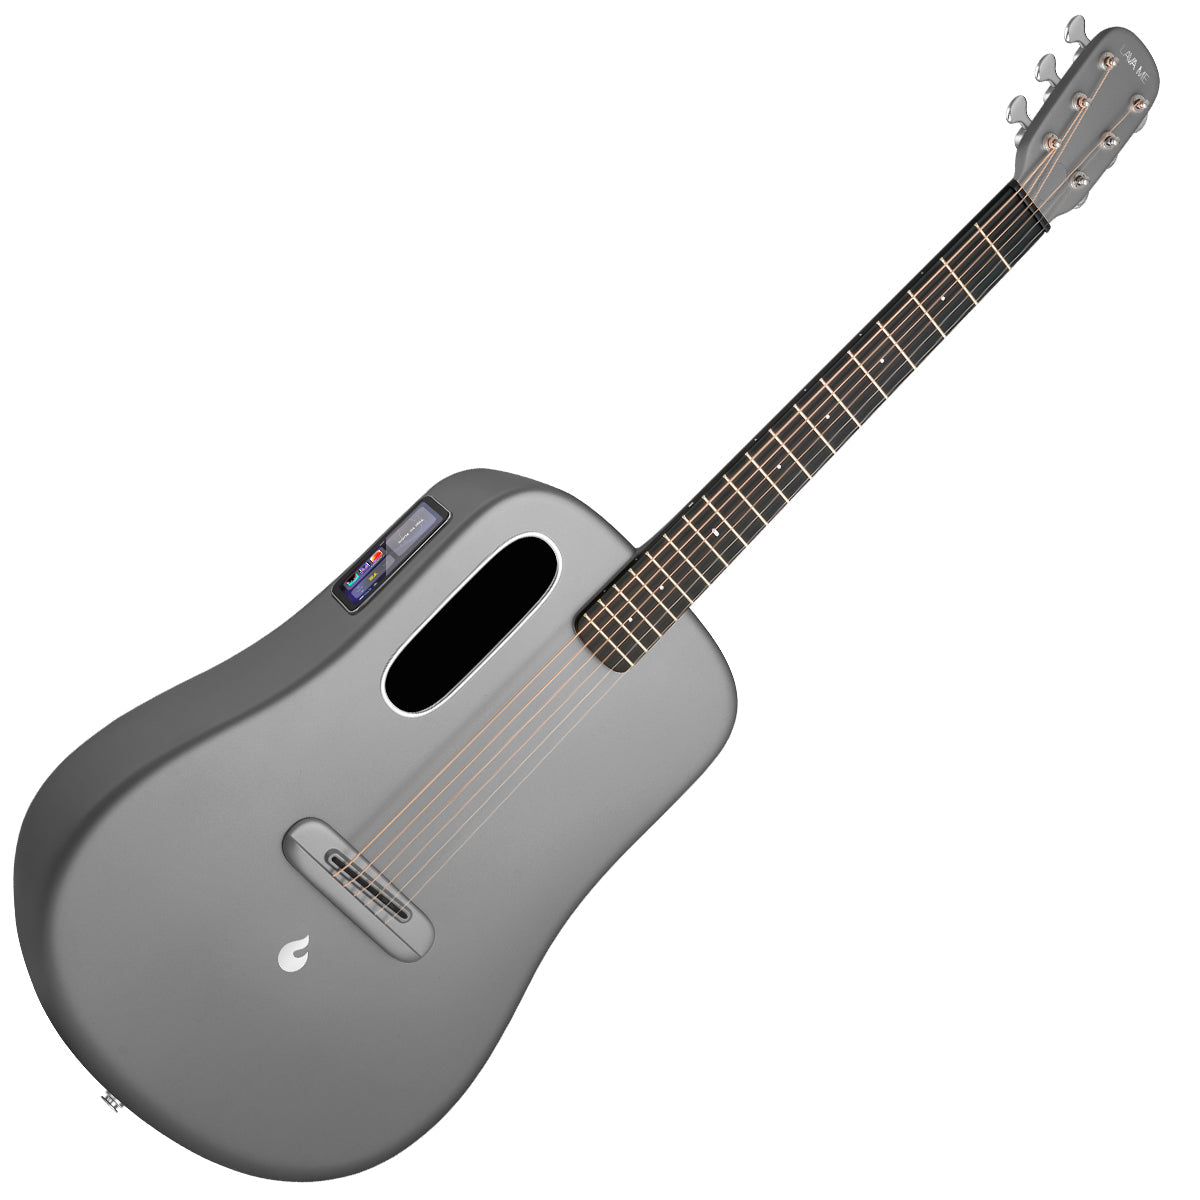 LAVA ME4 Carbon 36" with AirFlow Bag ~ Space Grey, Acoustic Guitar for sale at Richards Guitars.